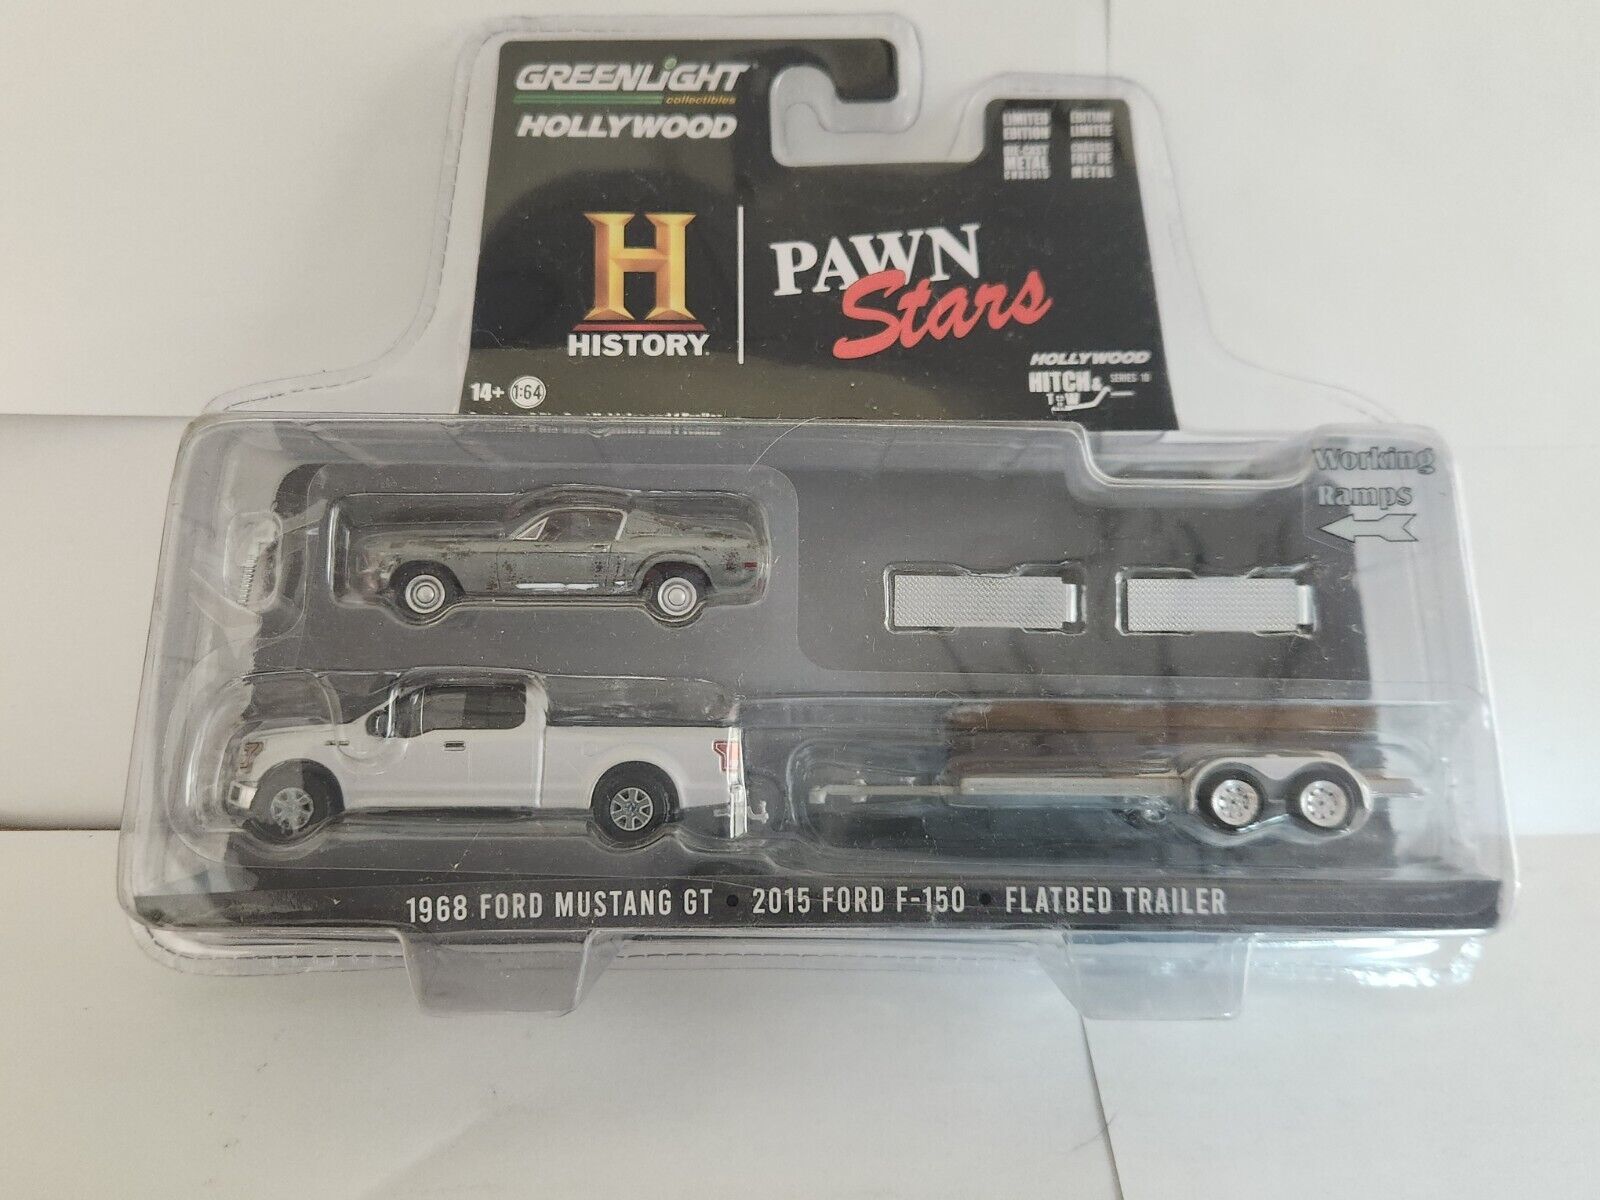 Greenlight Pawn Stars 1968 Ford Mustang 2015 Ford F-150 Flatbed Trailer L28